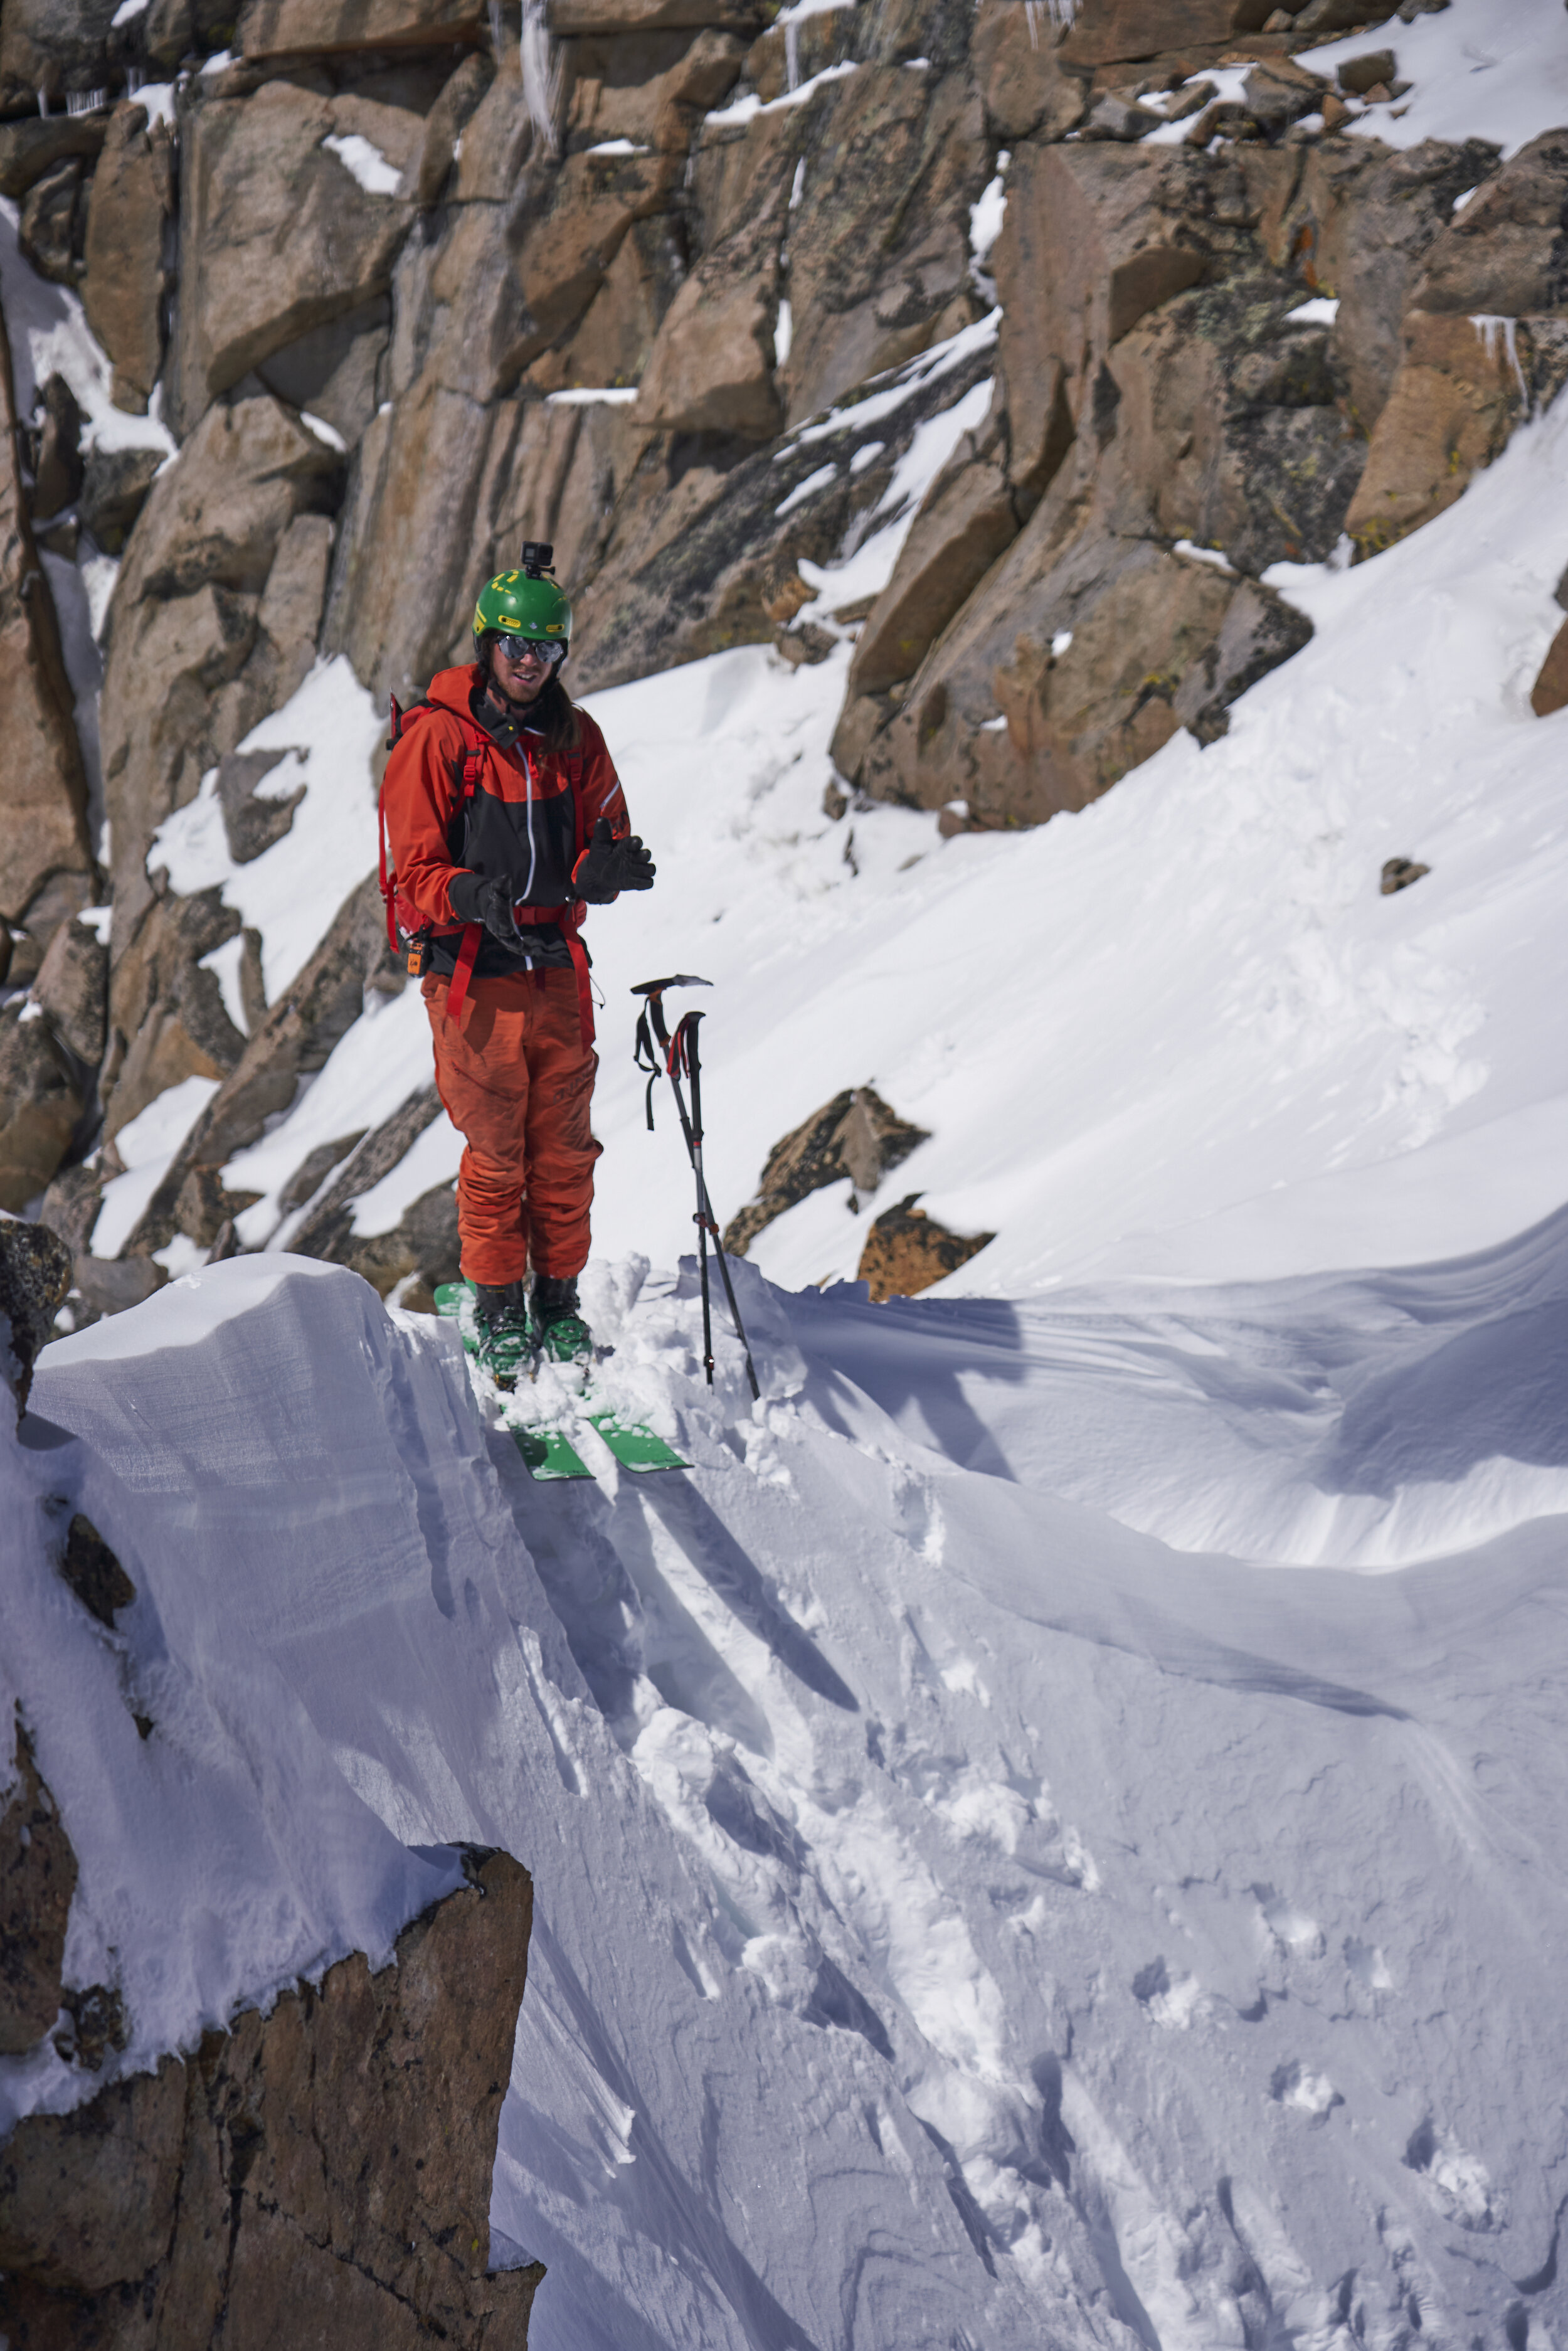 Dropping into the North Couloir of Whitetail